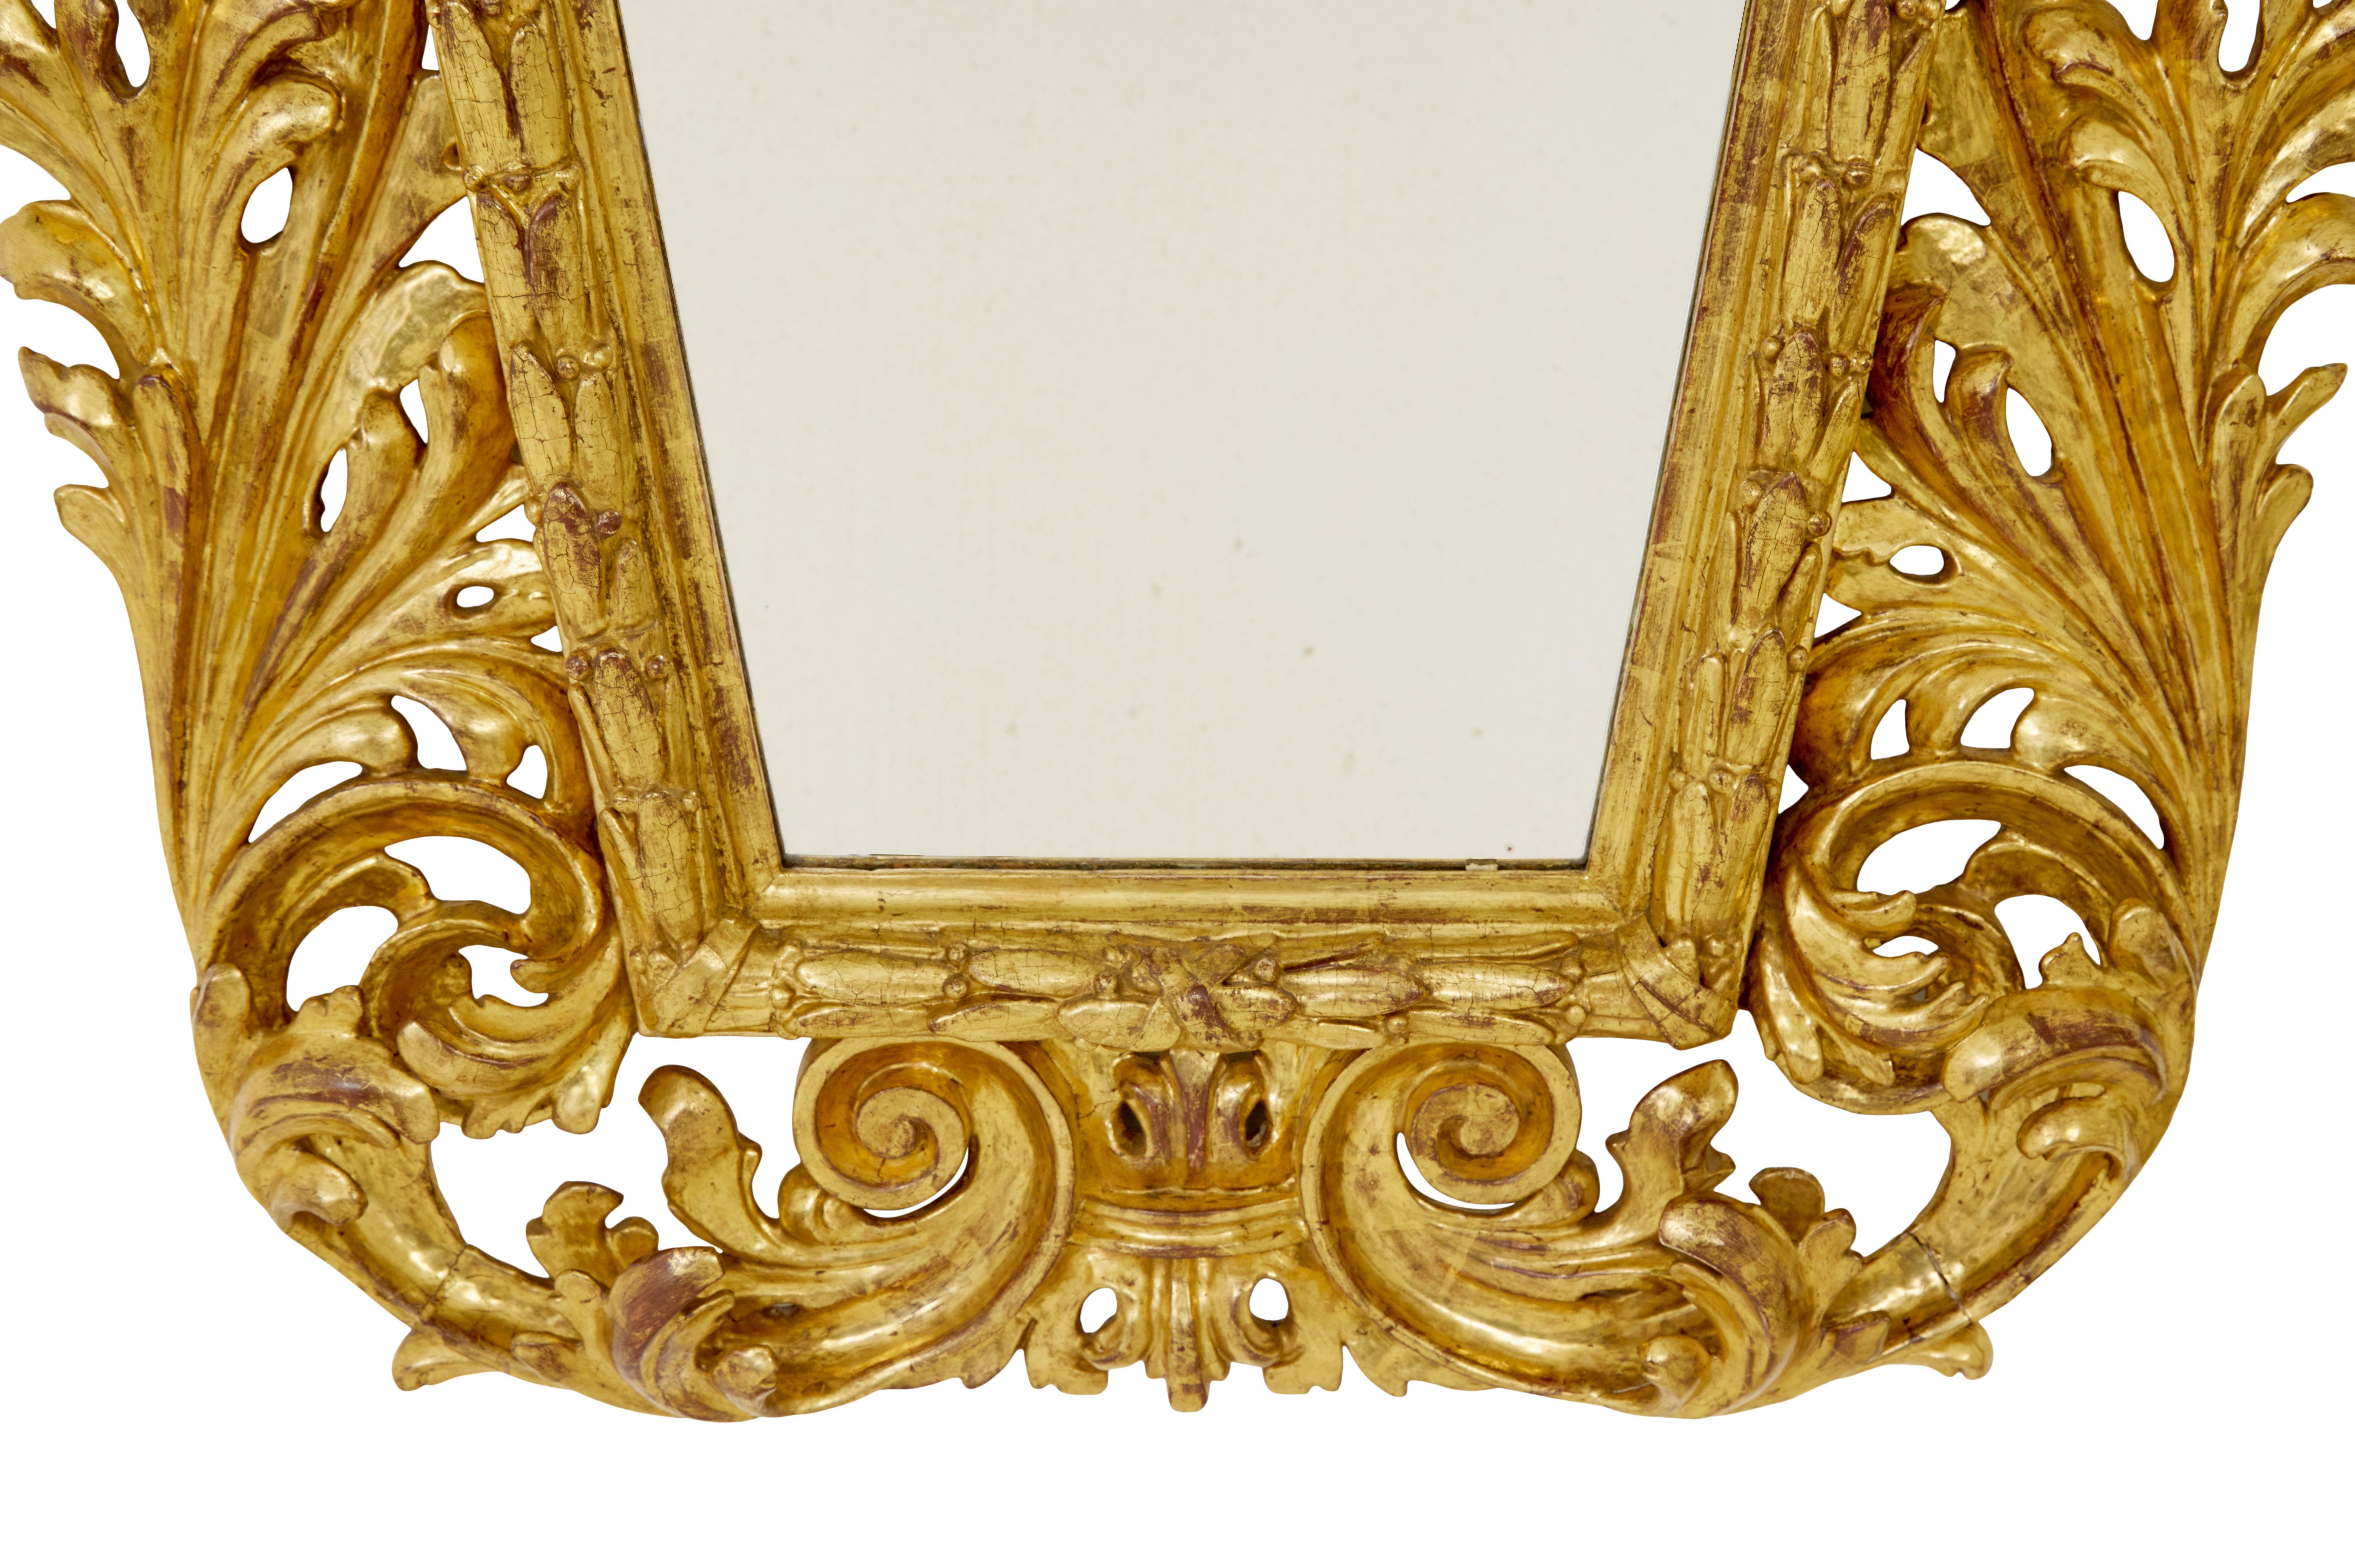 Giltwood 18th century carved Italian rococo giltwood mirror For Sale